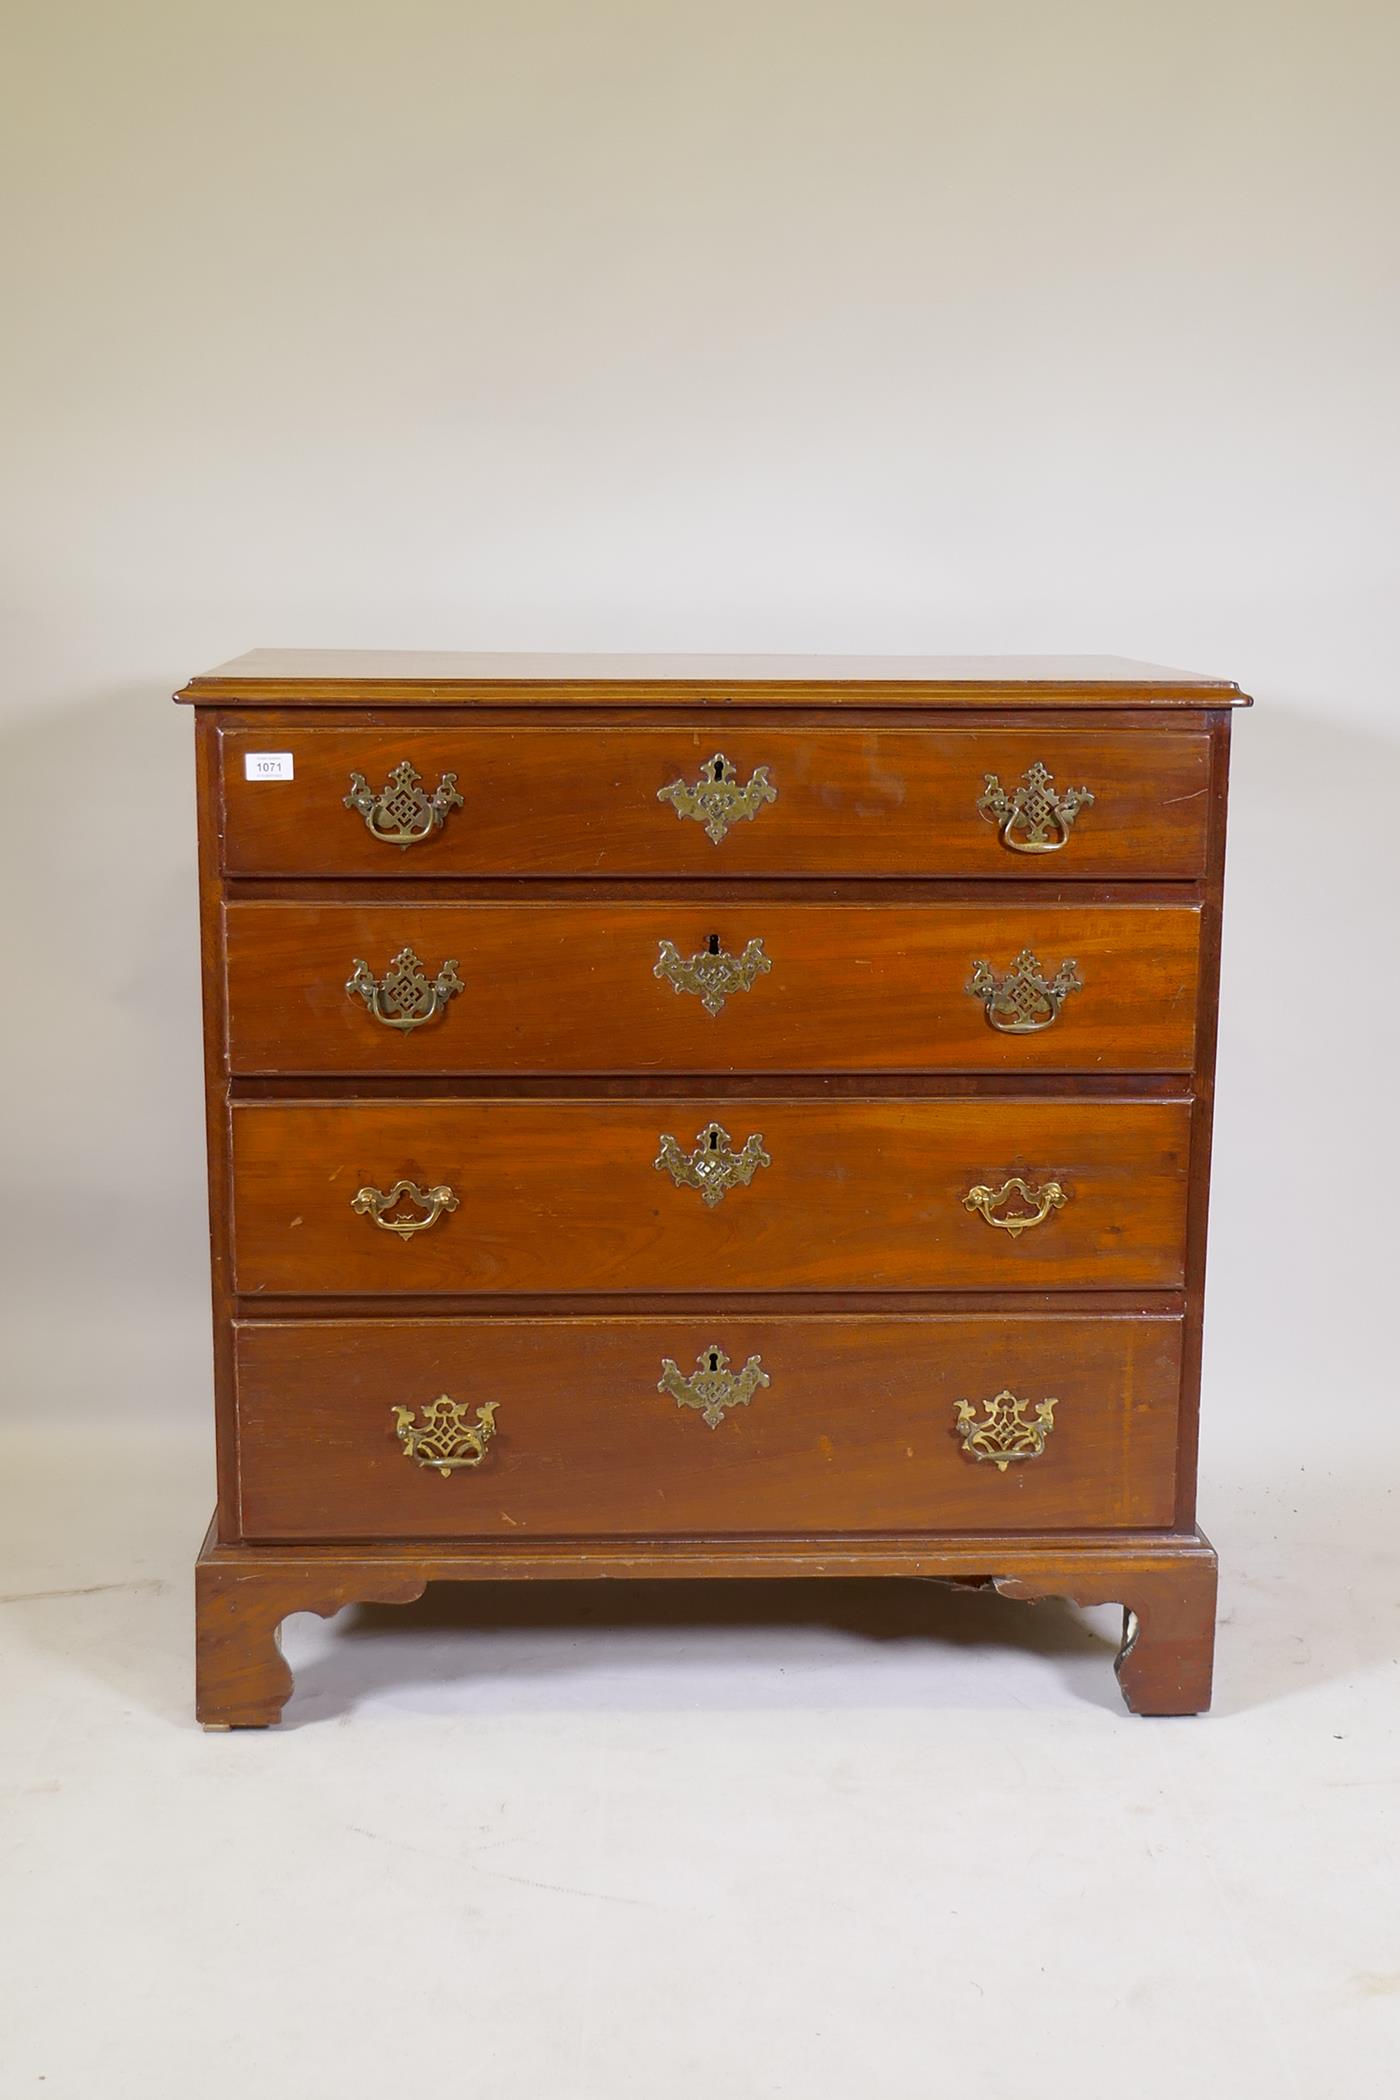 A C19th well figured solid mahogany chest of four long drawers, raised on bracket supports, 92 x